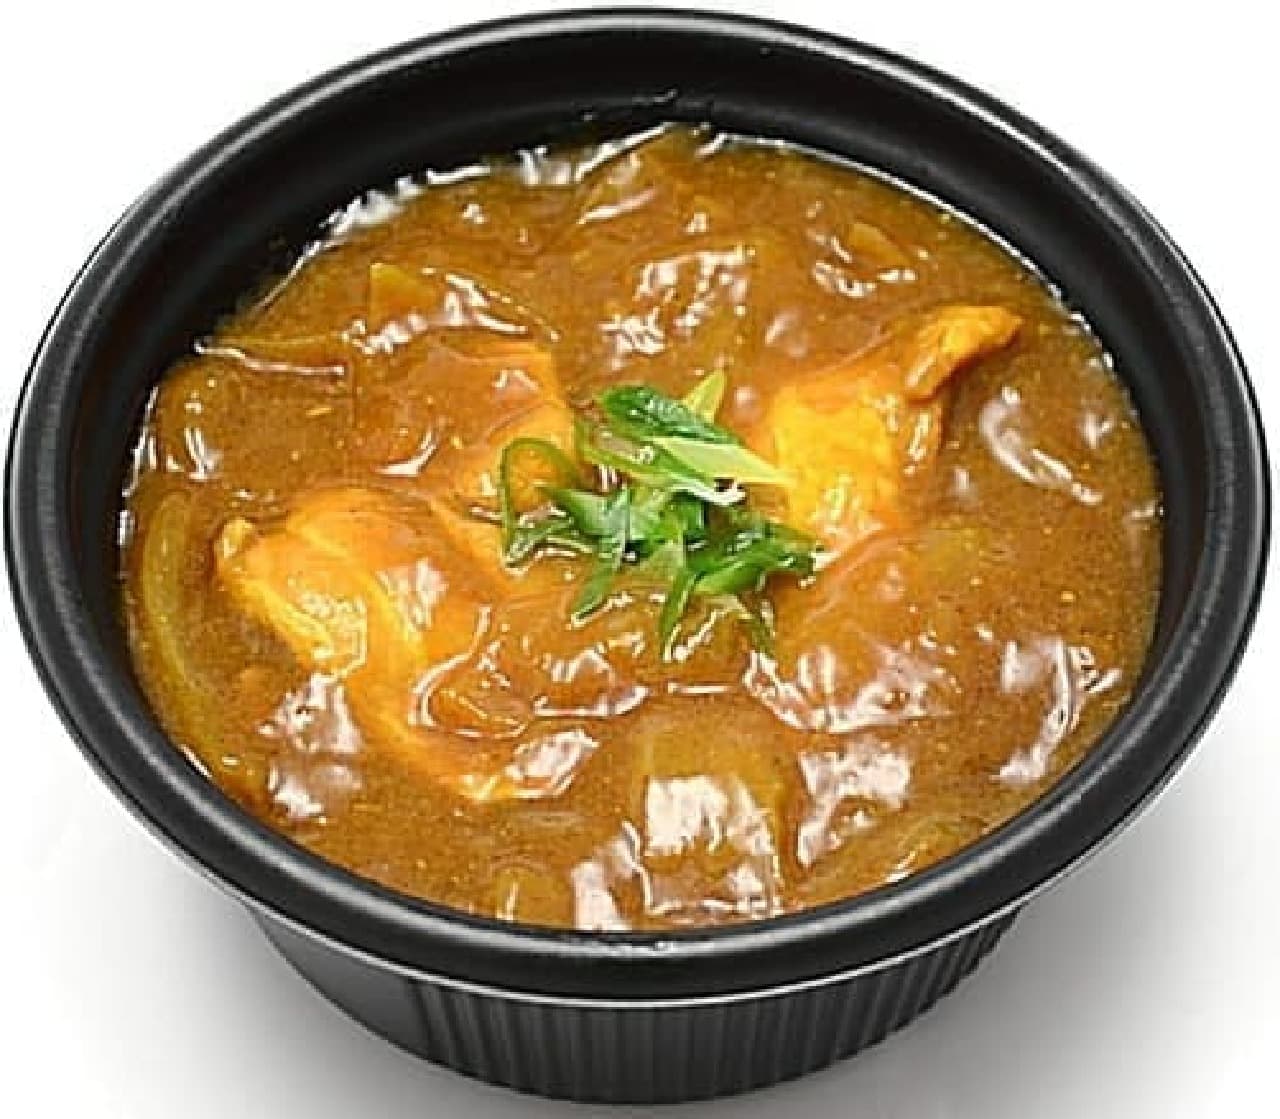 7-ELEVEN "Mini Japanese Curry Bowl"